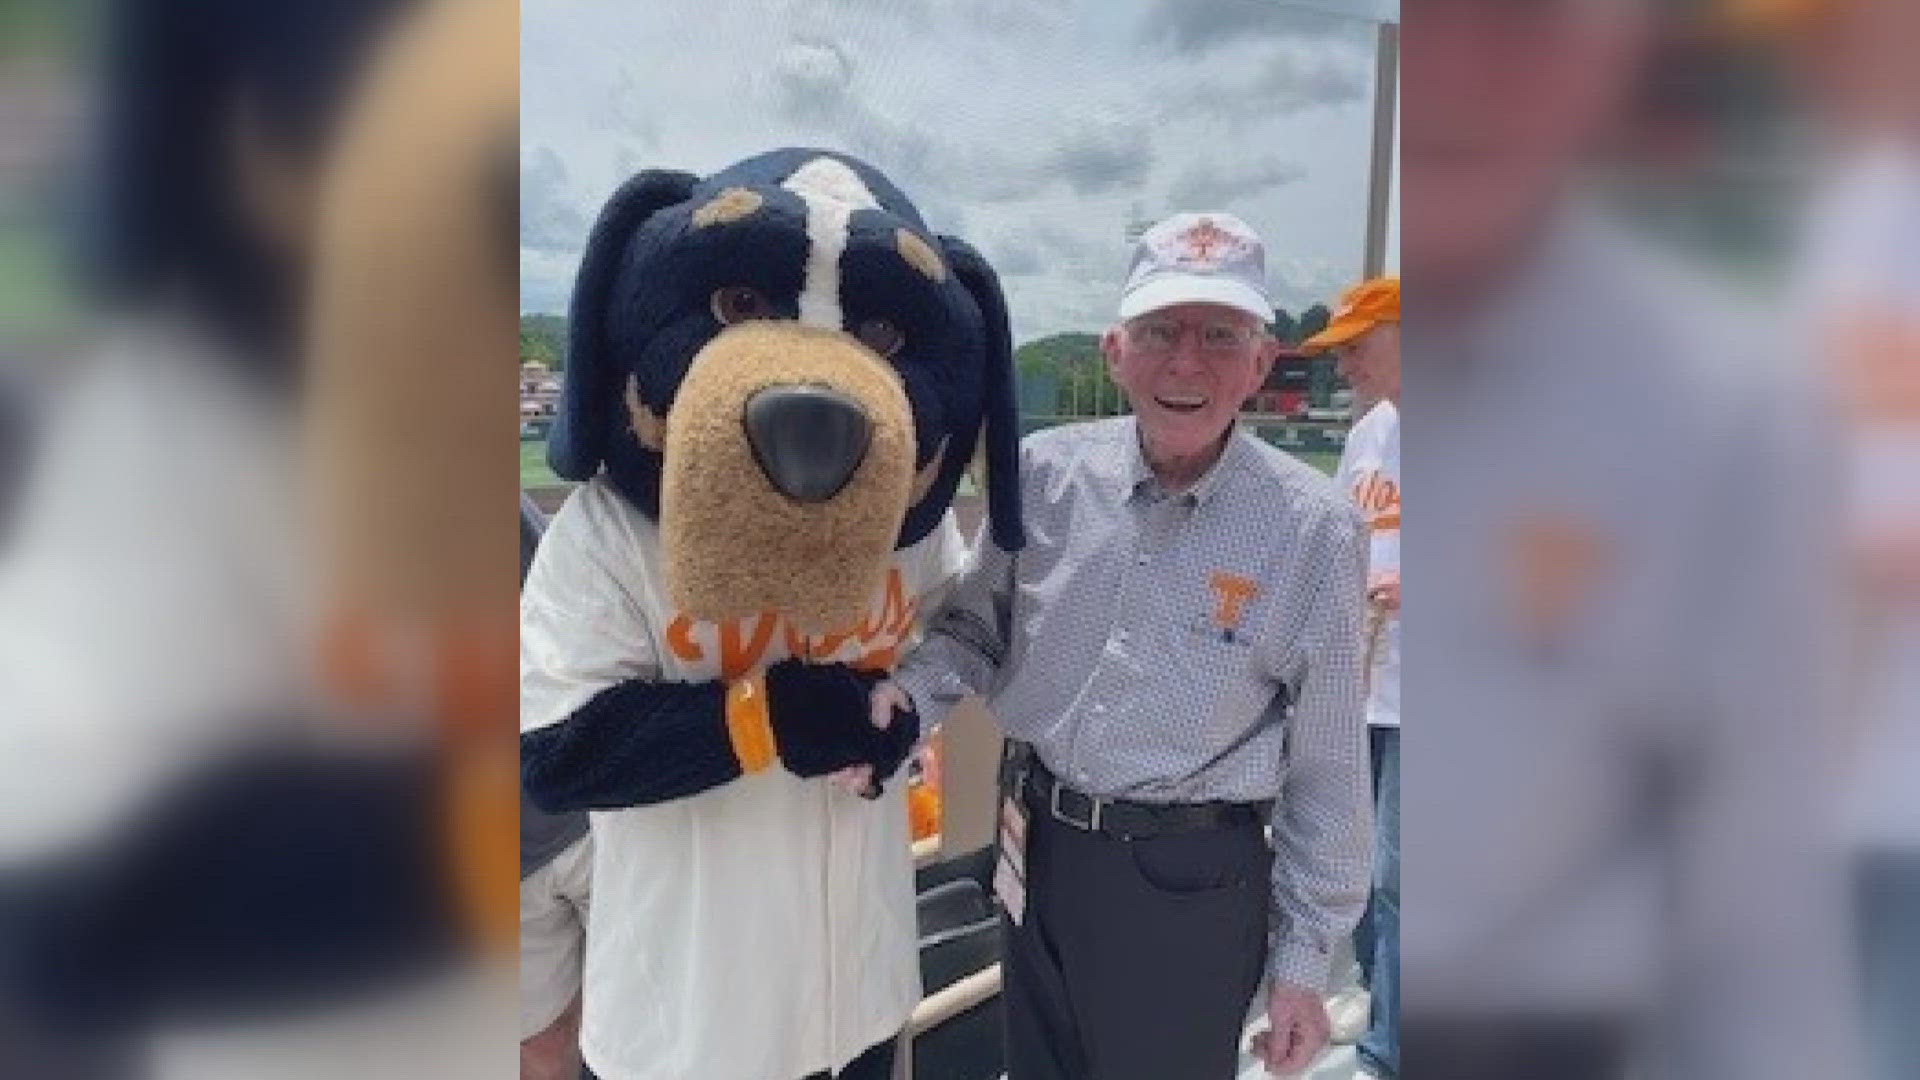 Jim Worthington returned to the baseball stadium last year to throw the first pitch of that season. This season, he watched his team win the College World Series.